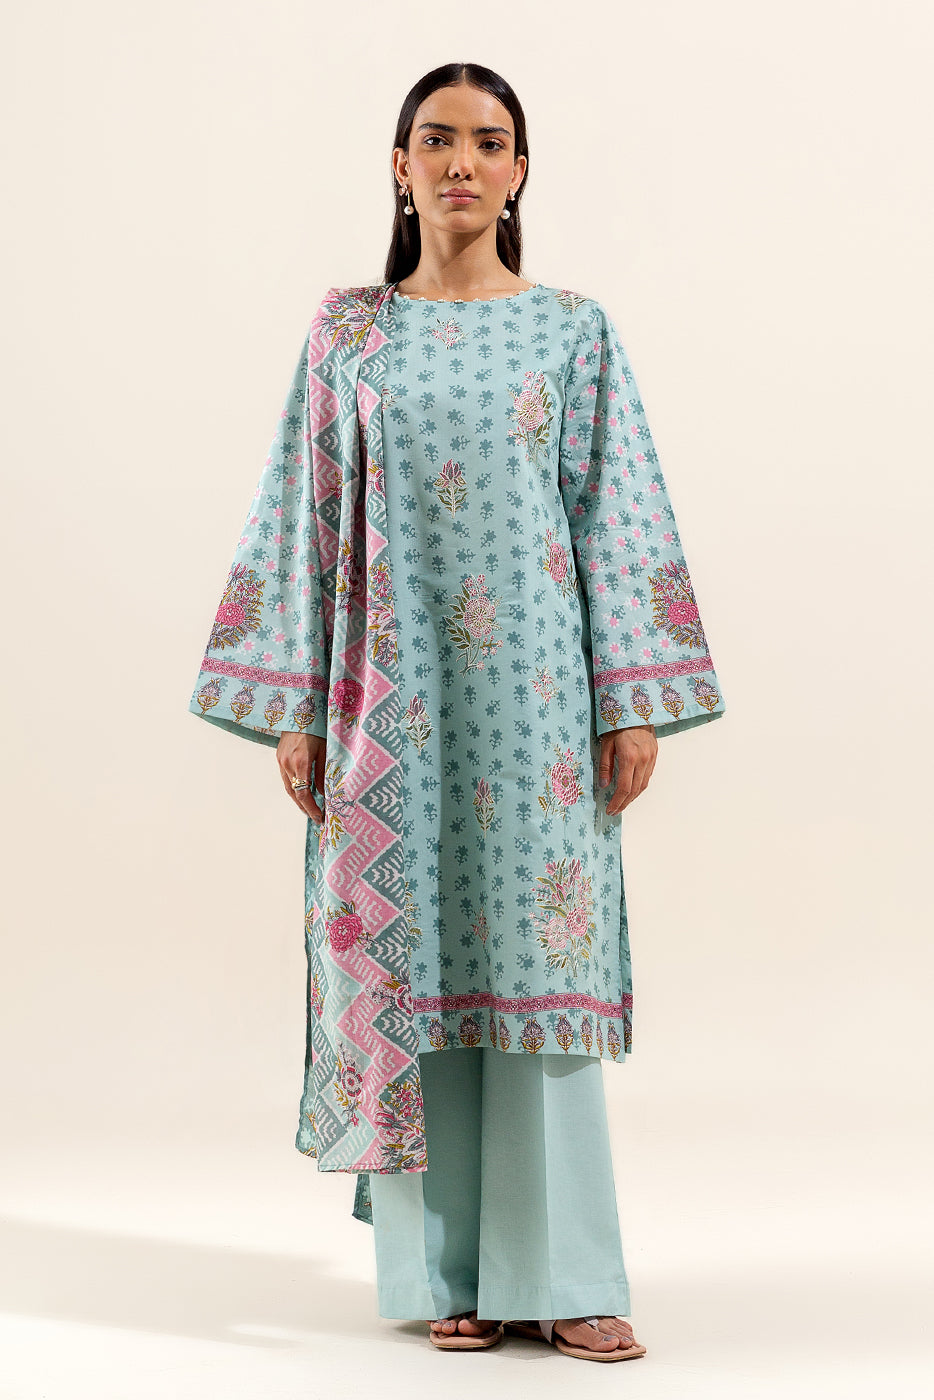 3 PIECE EMBROIDERED LAWN SUIT-SAGE GREEN (UNSTITCHED)